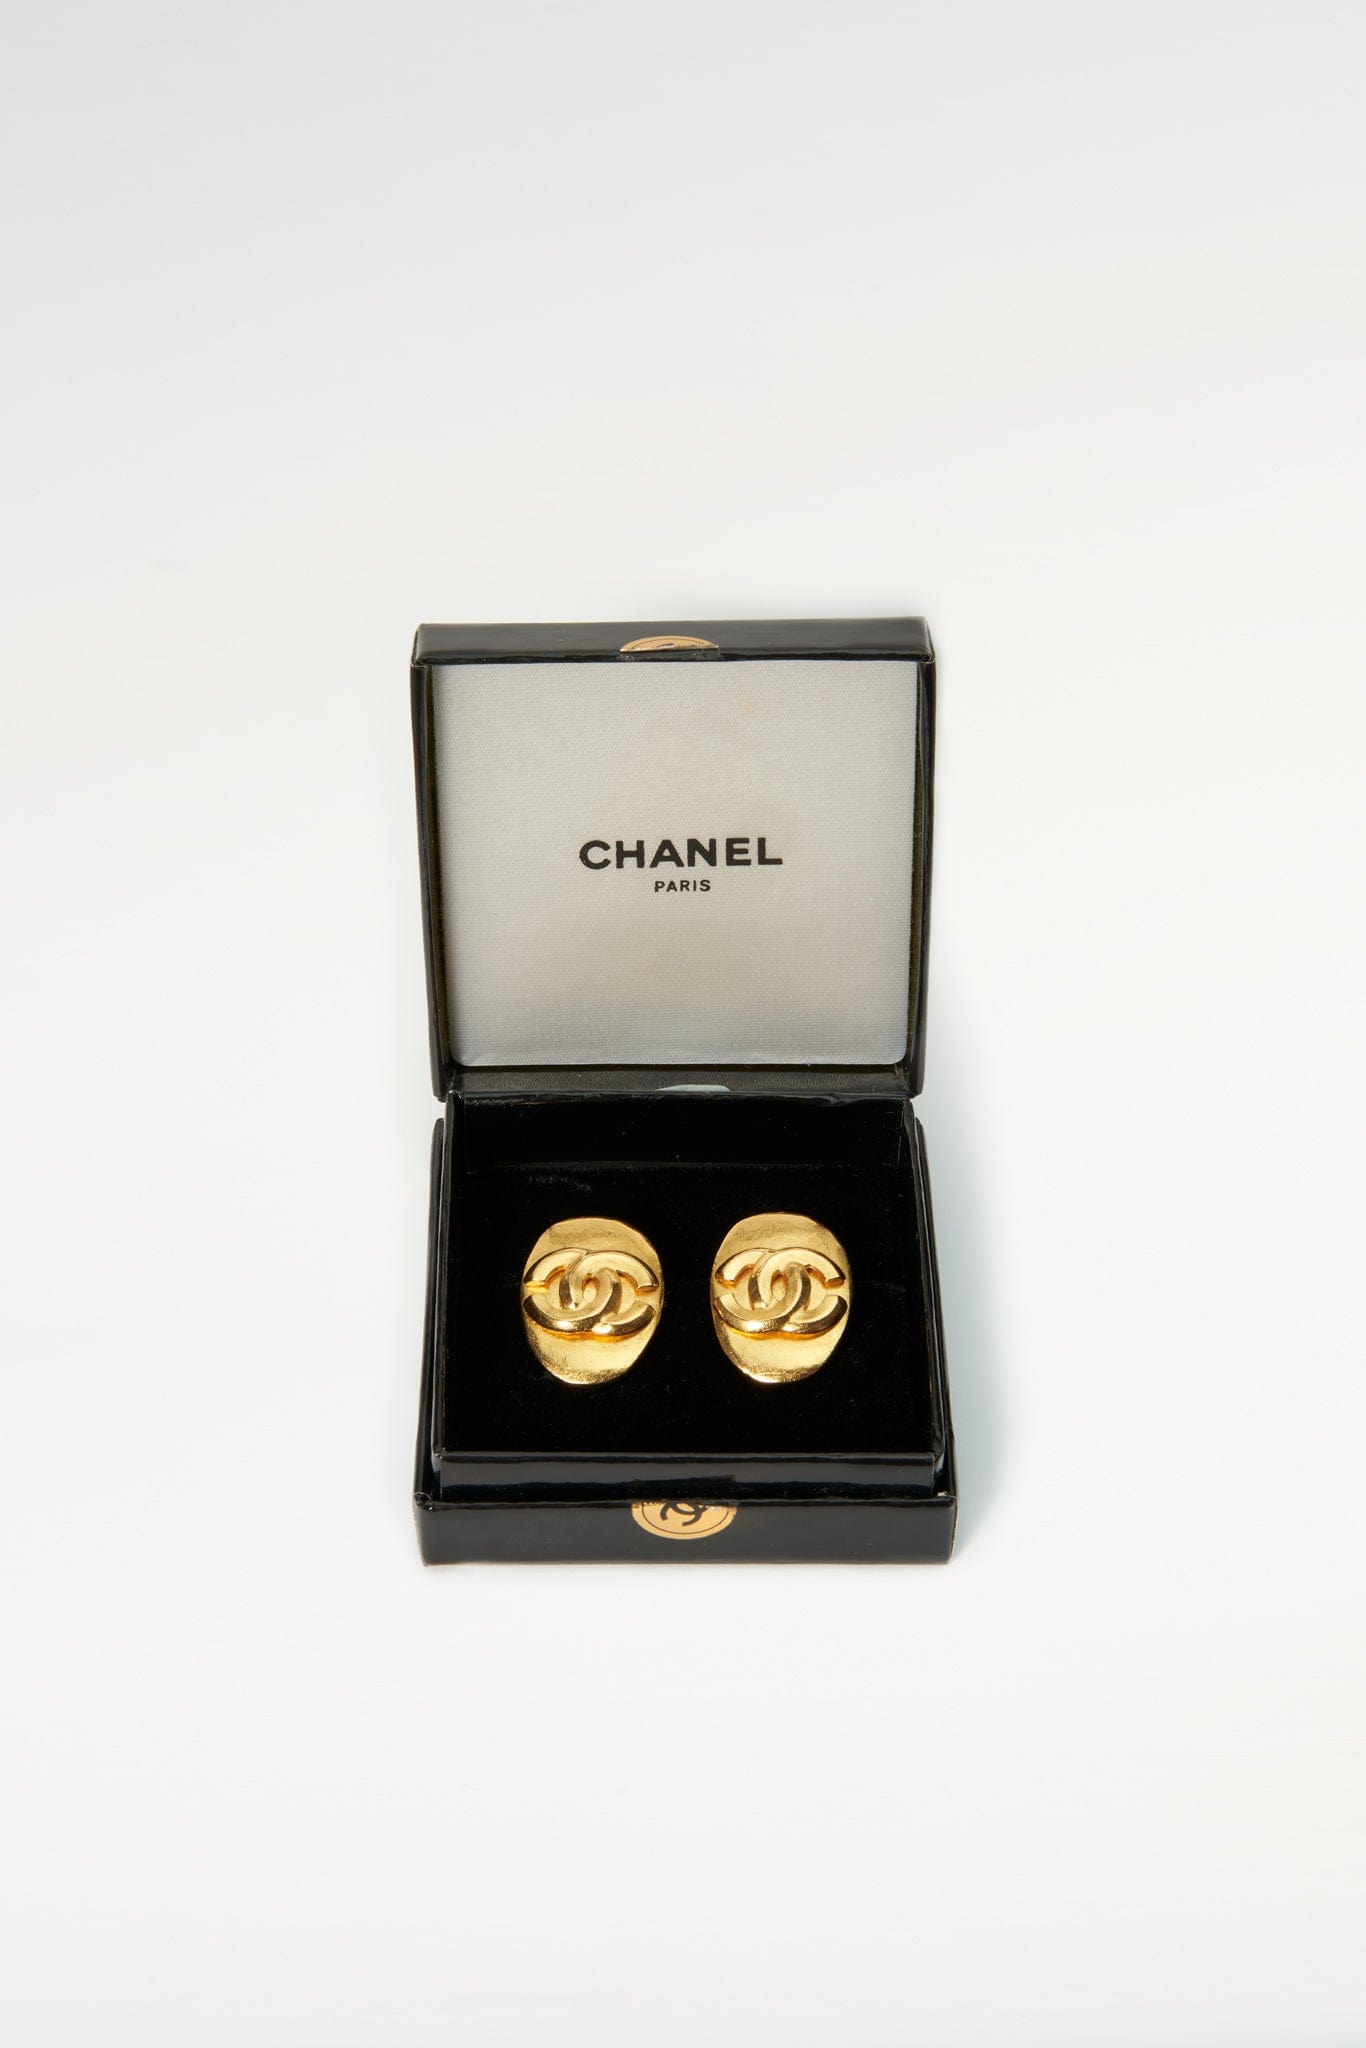 CHANEL Earrings, Authentic CHANEL Gold Tone Clip On, CC Logo, Very Rare,  Vintage, Chic French High Fashion, Gift Idea for Her, Free Shipping